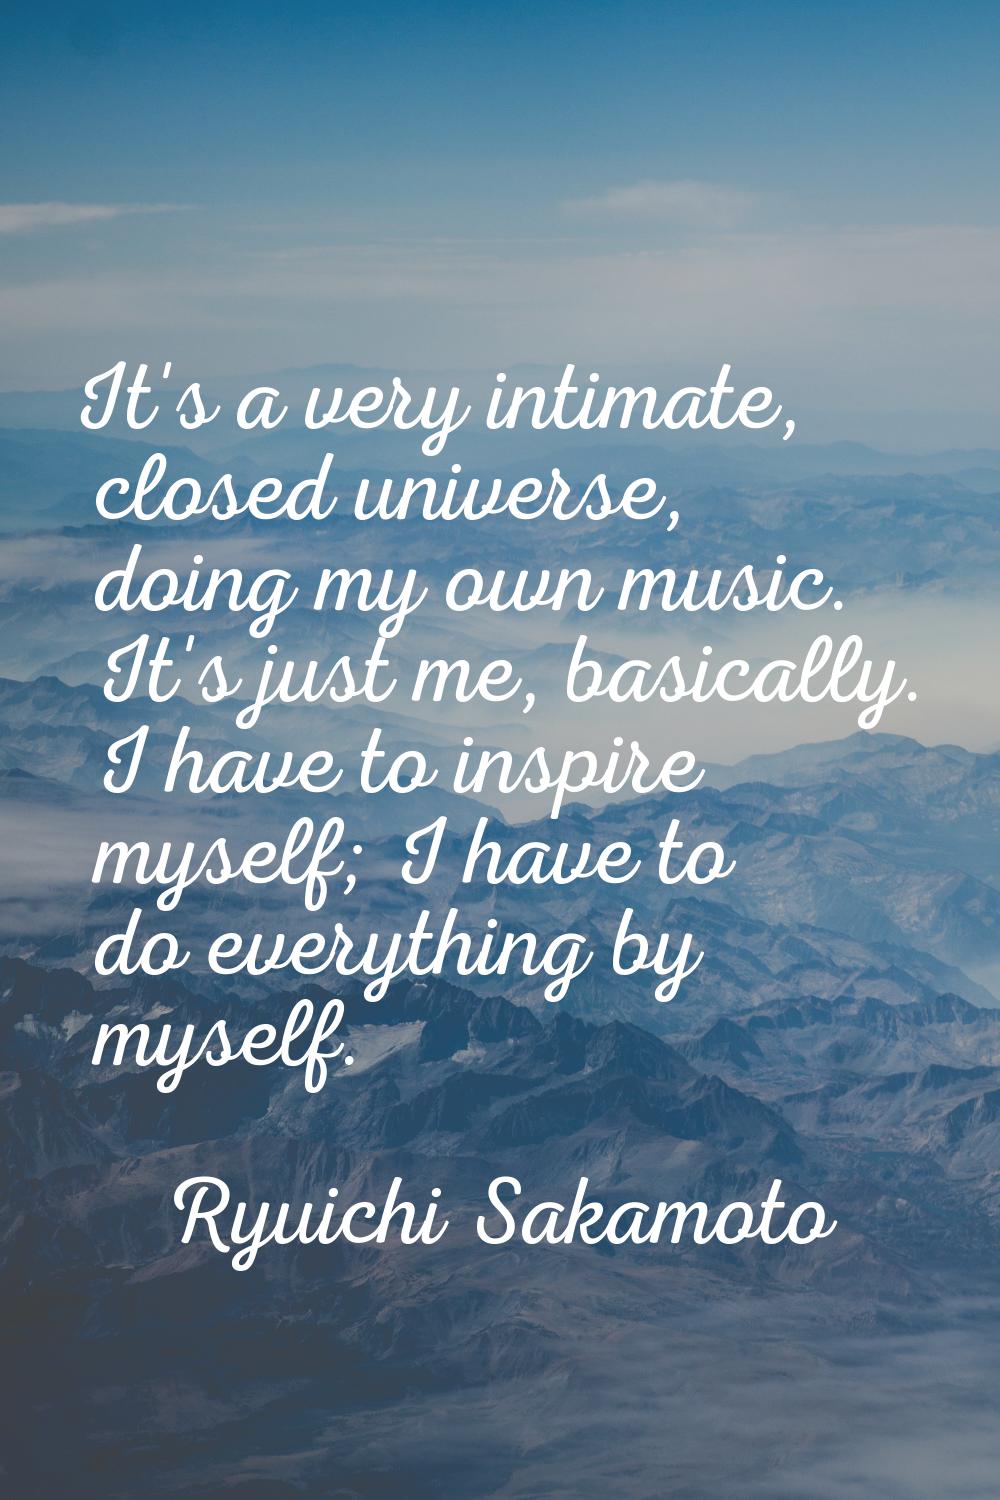 It's a very intimate, closed universe, doing my own music. It's just me, basically. I have to inspi